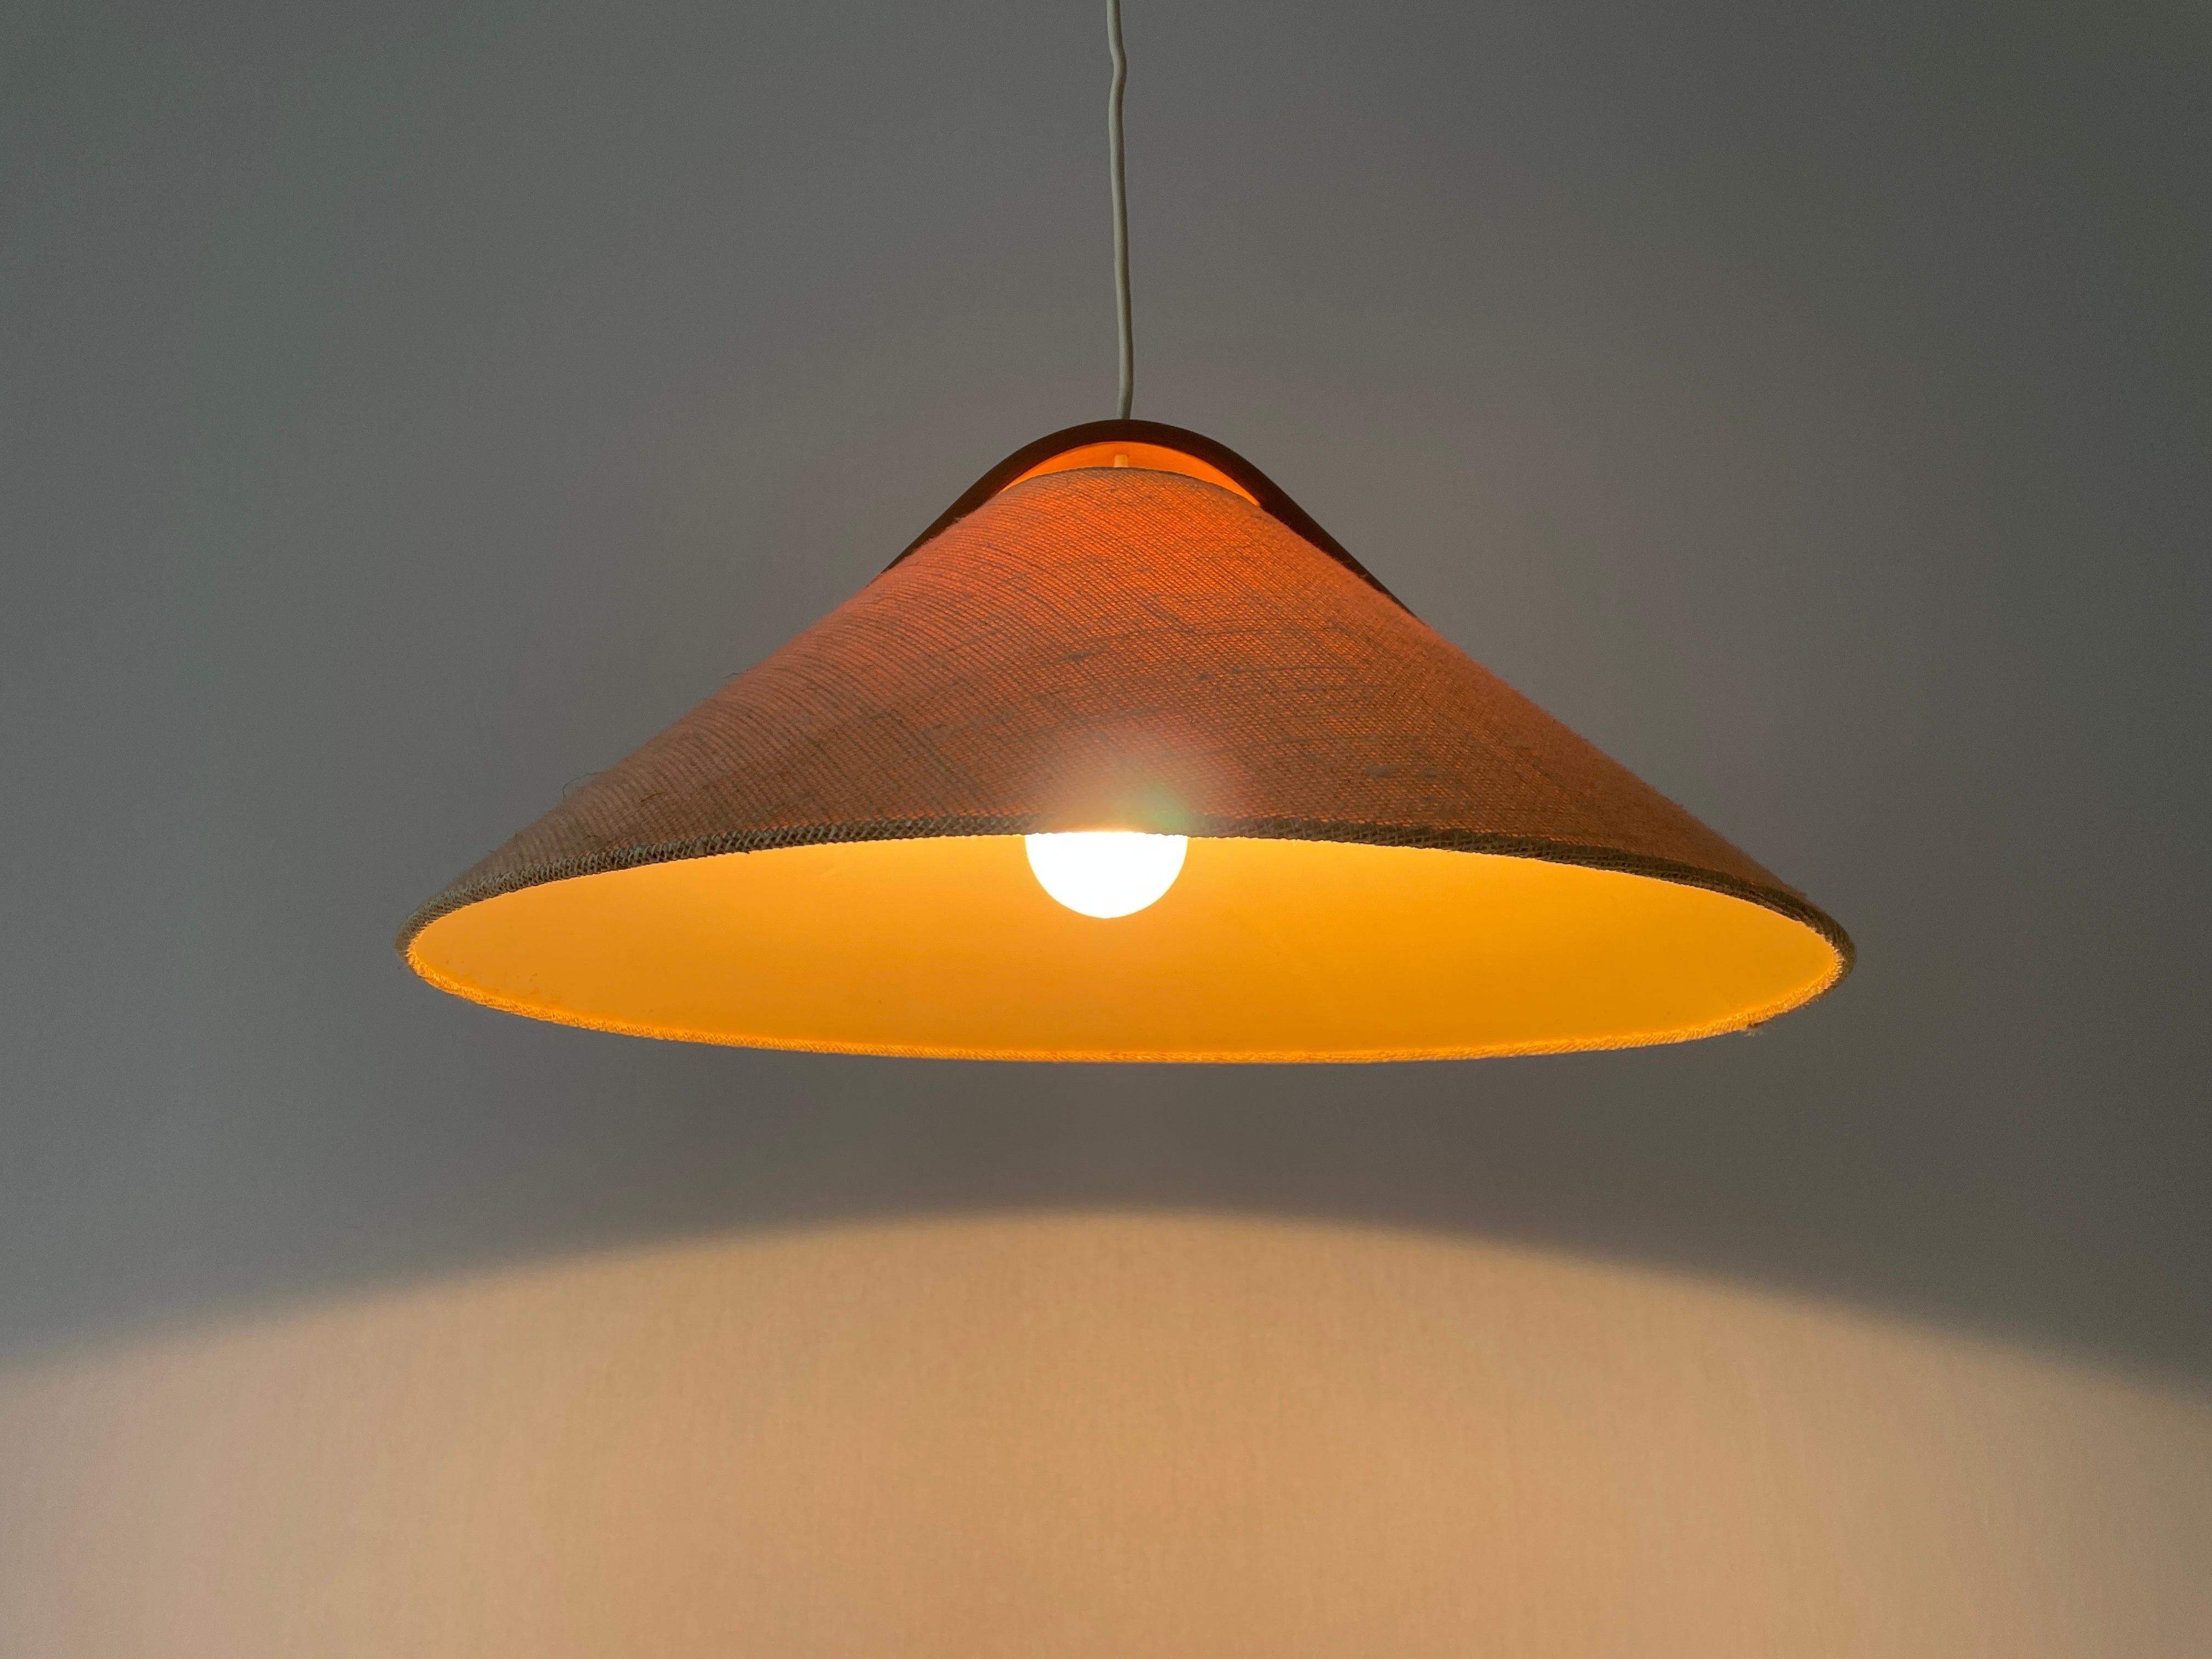 Conic Design Fabric Pendant Lamp with Teak Detail, 1960s, Germany For Sale 9